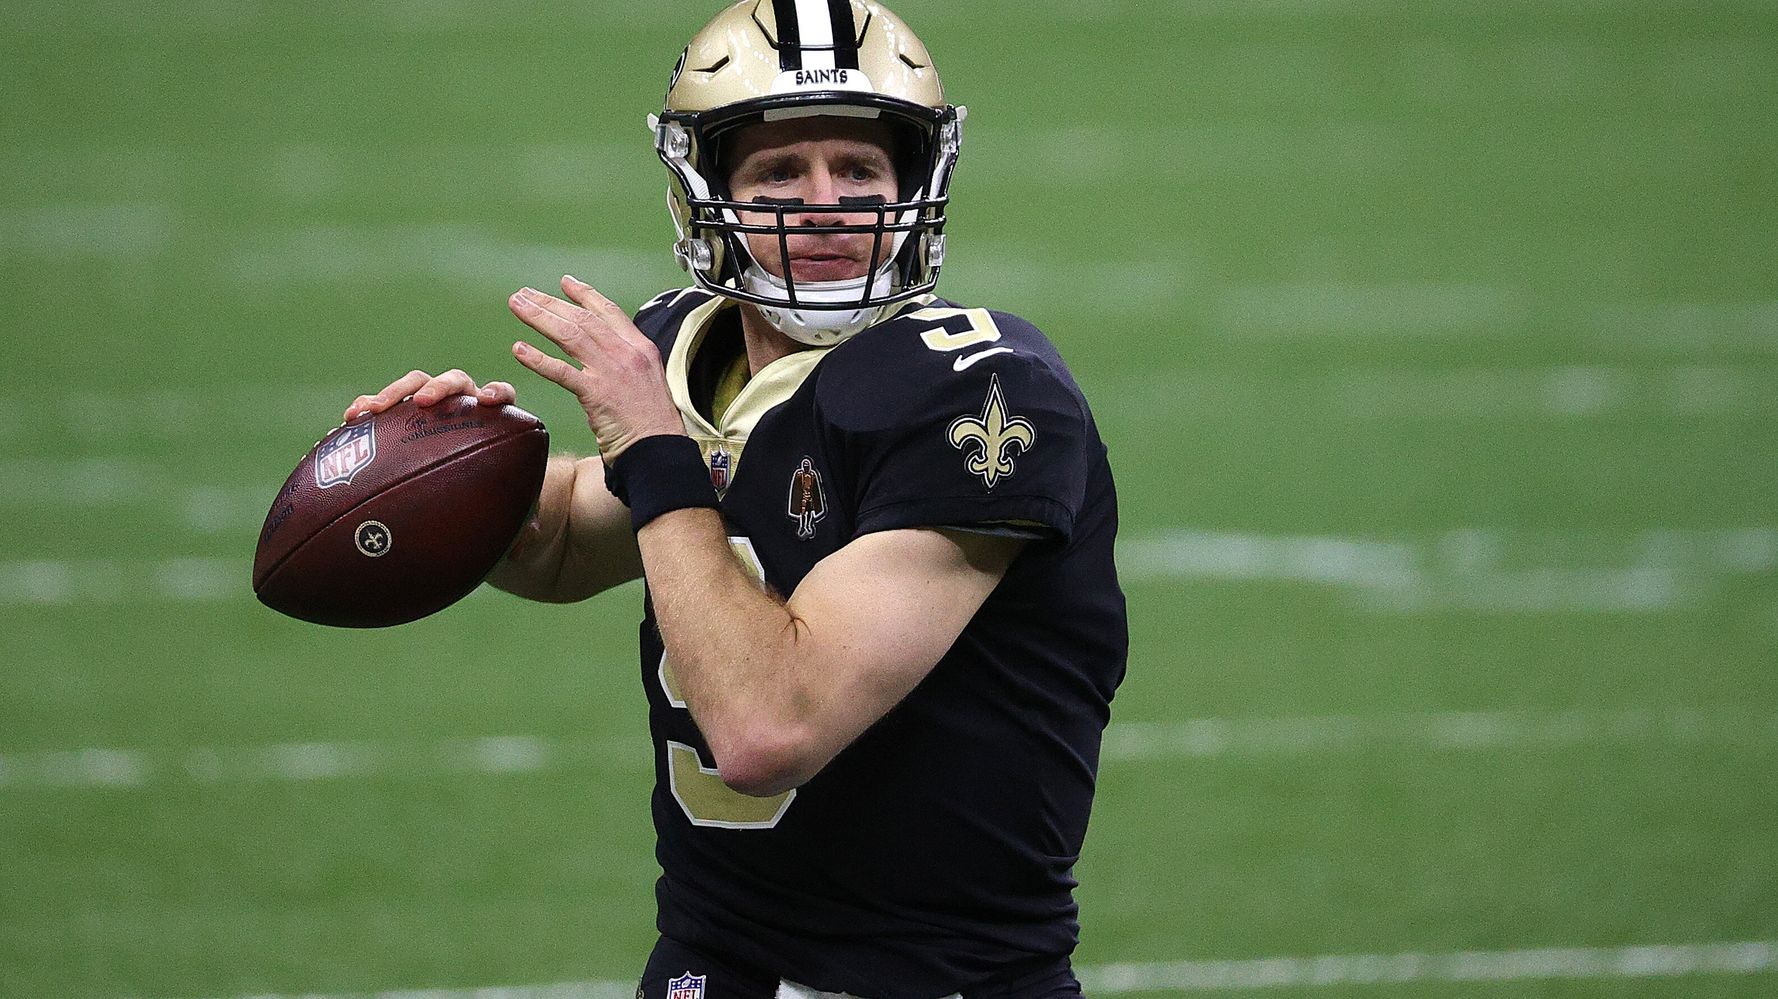 Drew Brees unveils next career move after retiring from the NFL